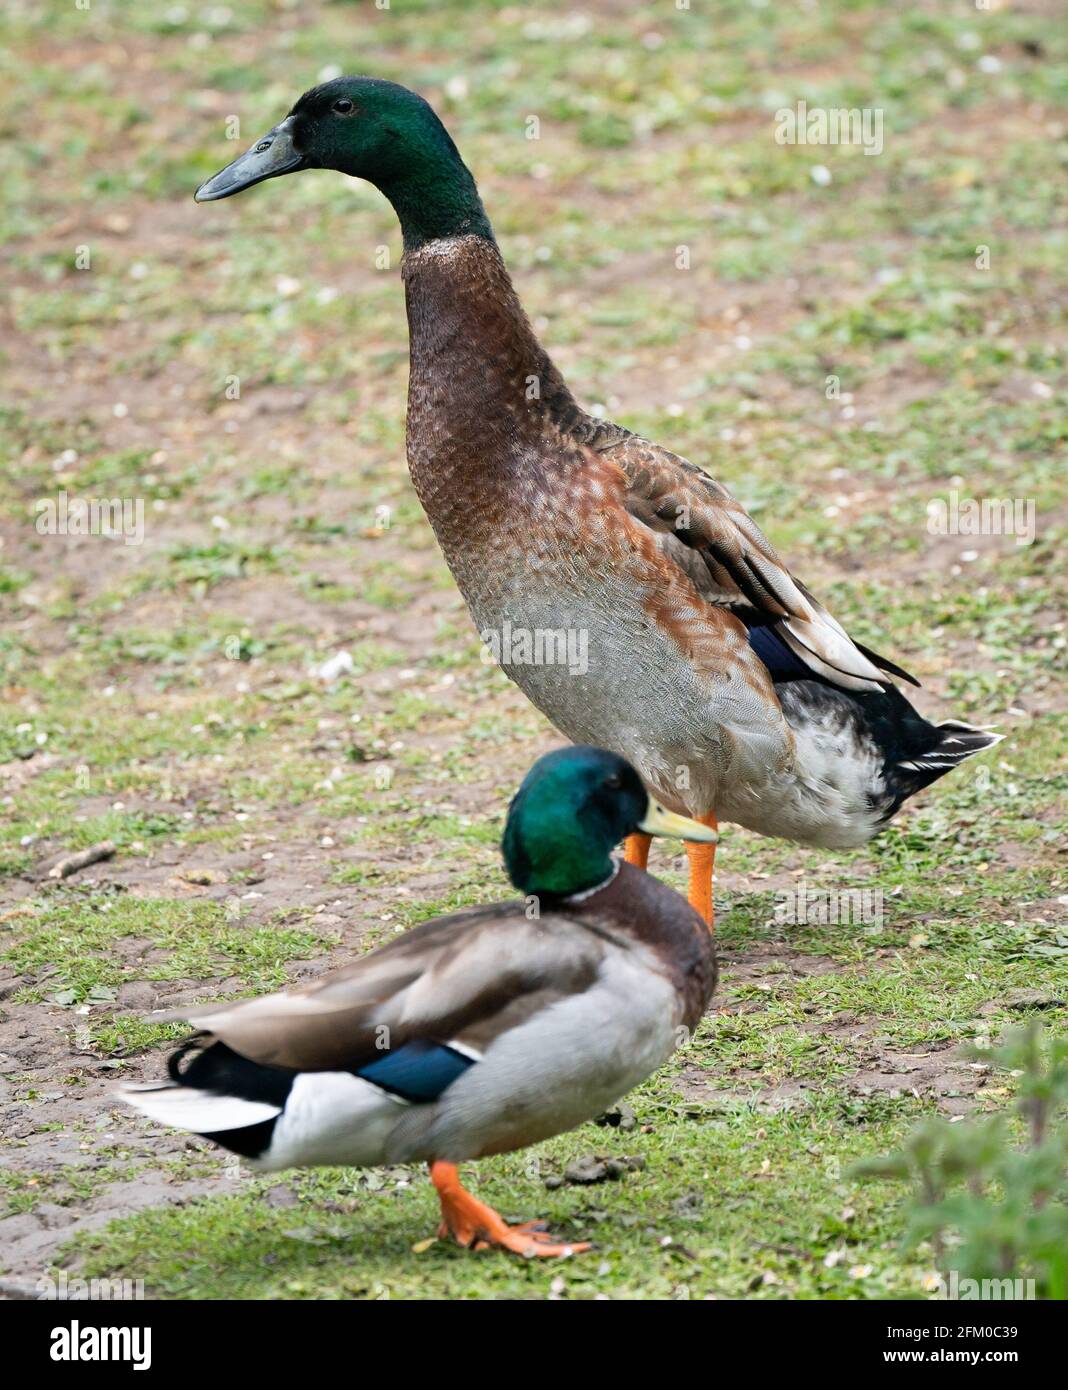 York university campus duck named Long Boi who went viral due to his impressive stature. It is believed that the very large duck is a cross between a Mallard and an Indian Runner duck. Picture date: Monday May 3, 2021. Stock Photo